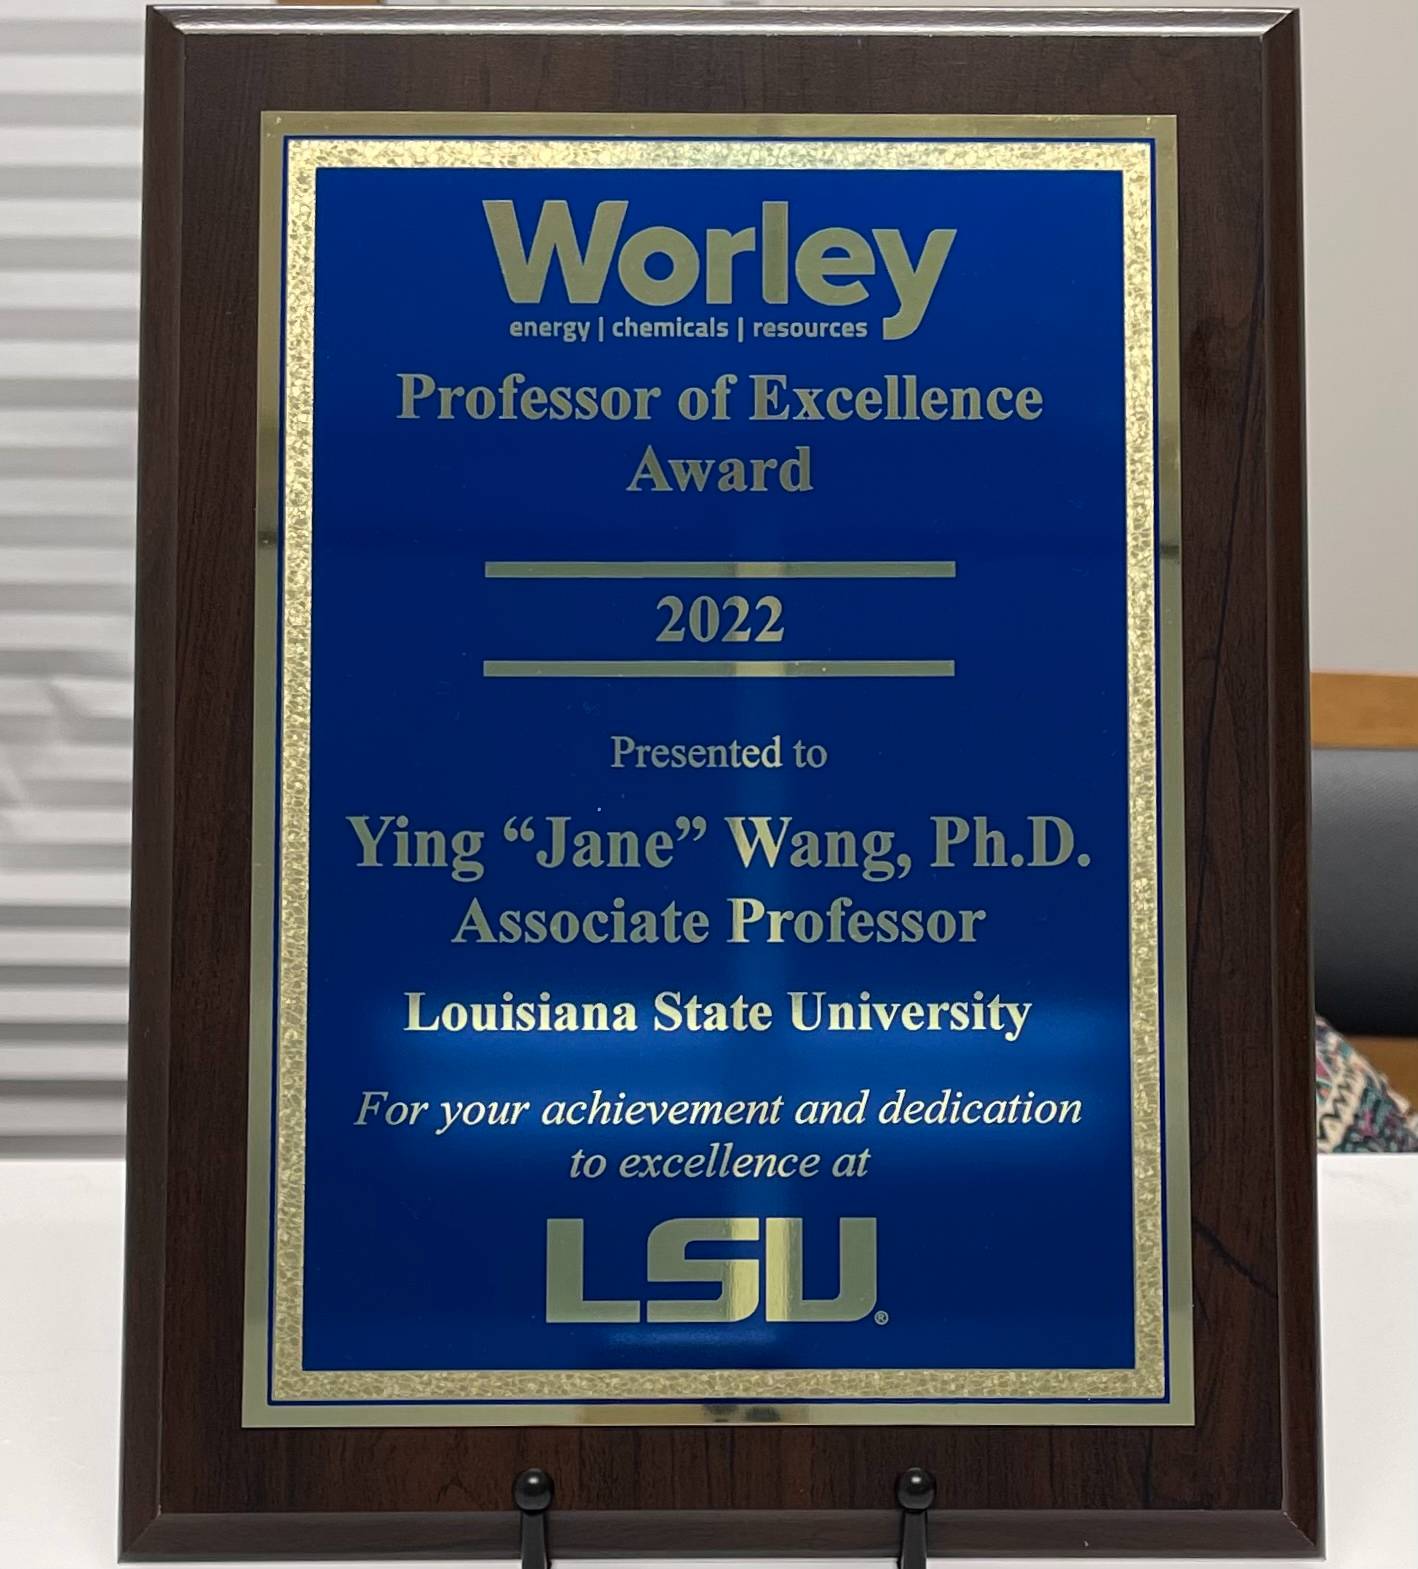 Professor of Excellence Award